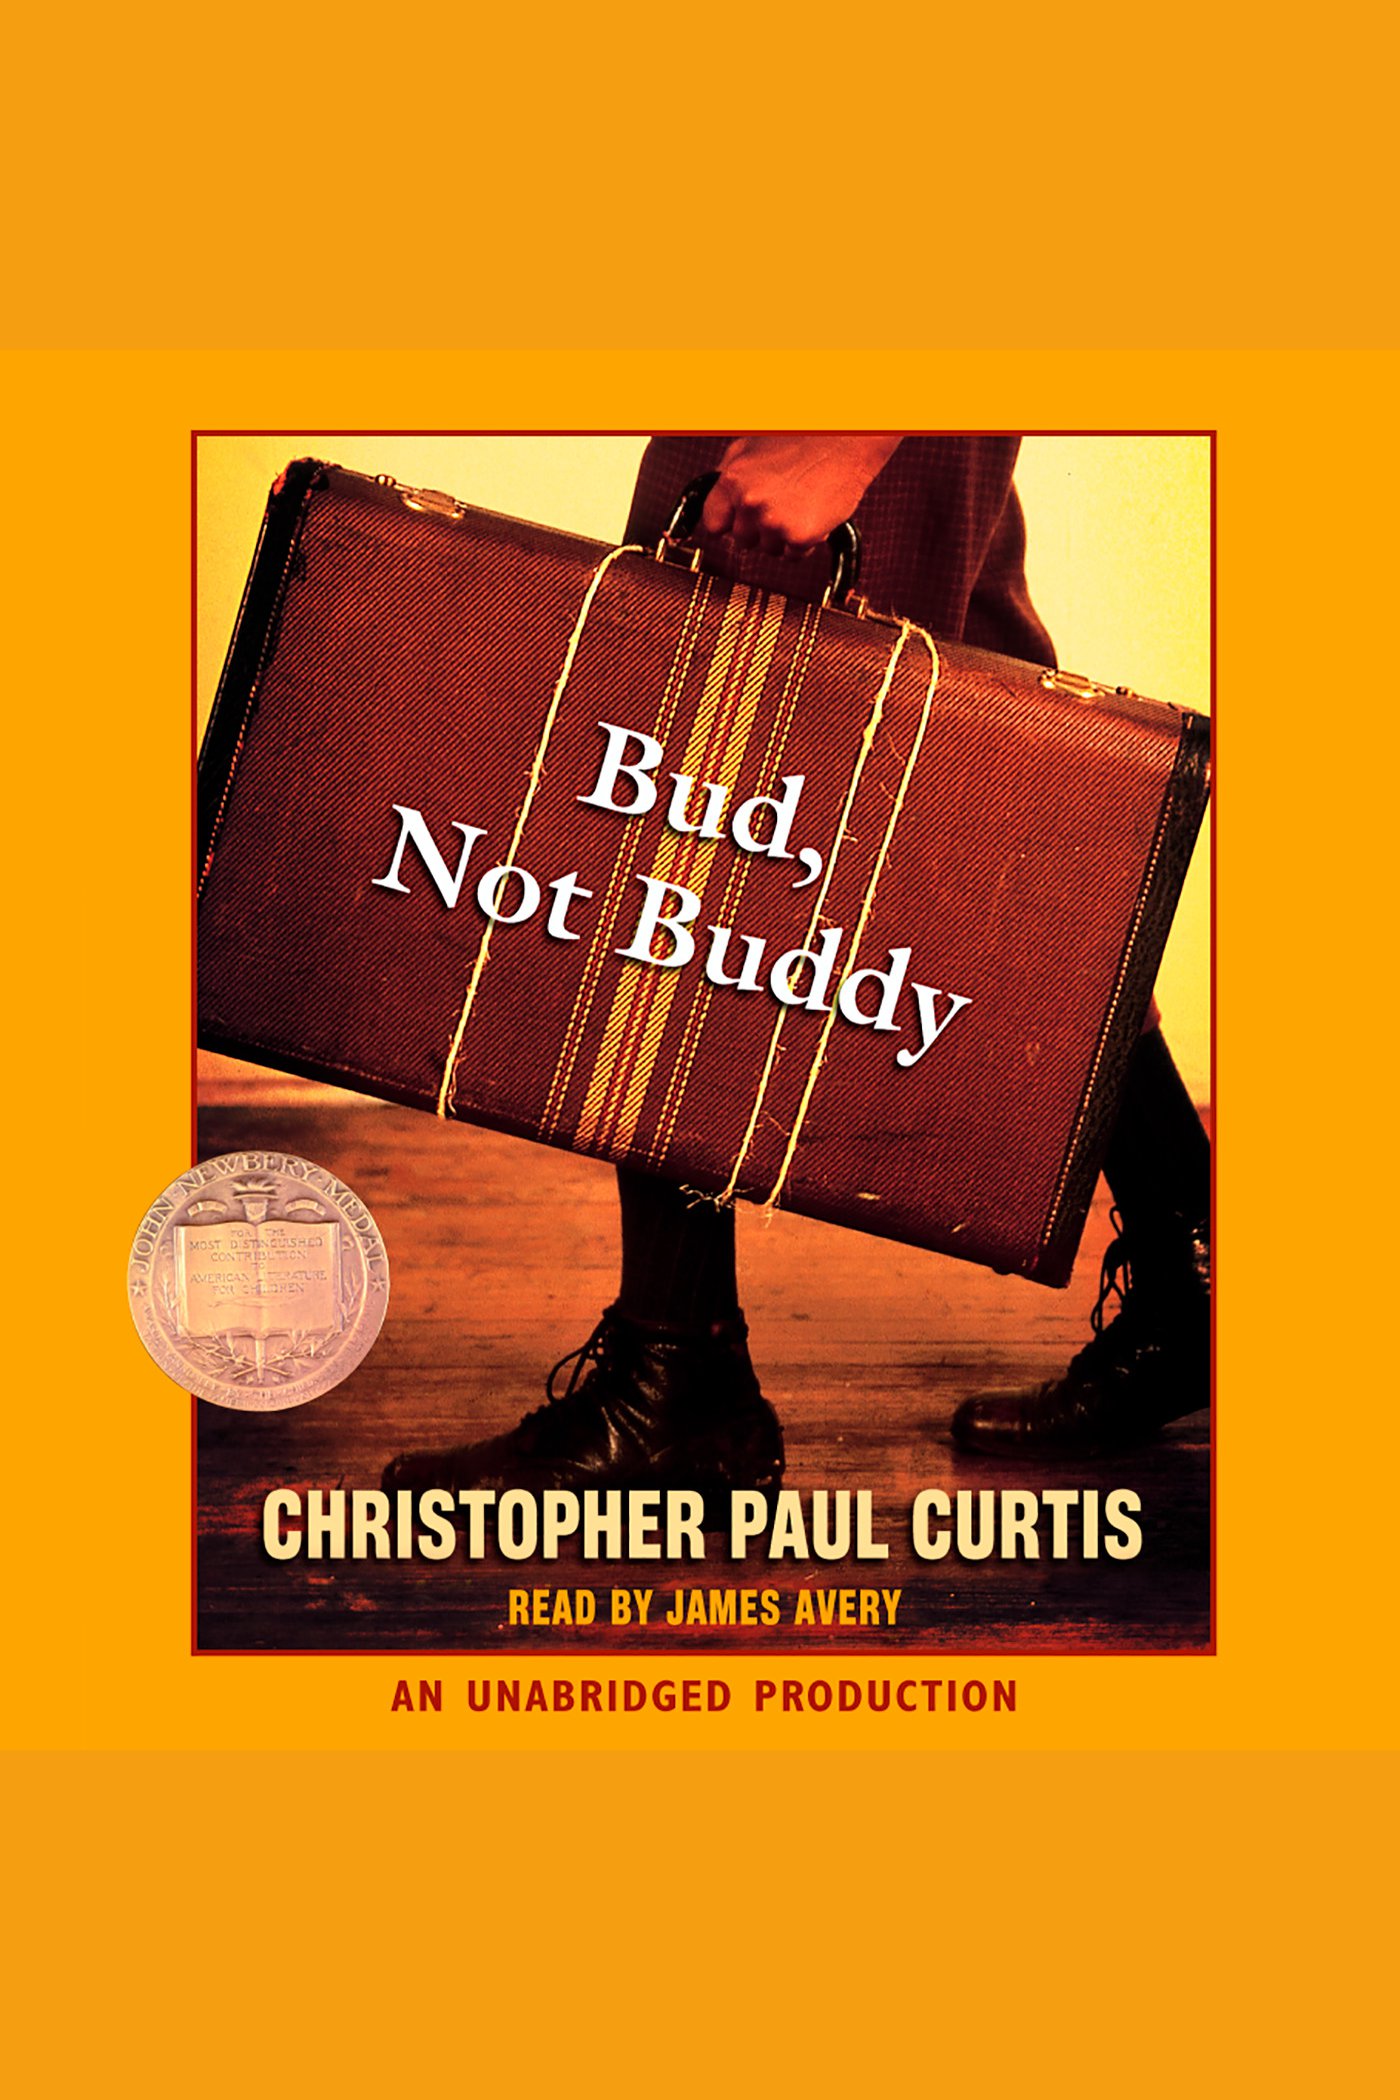 Bud, not Buddy cover image